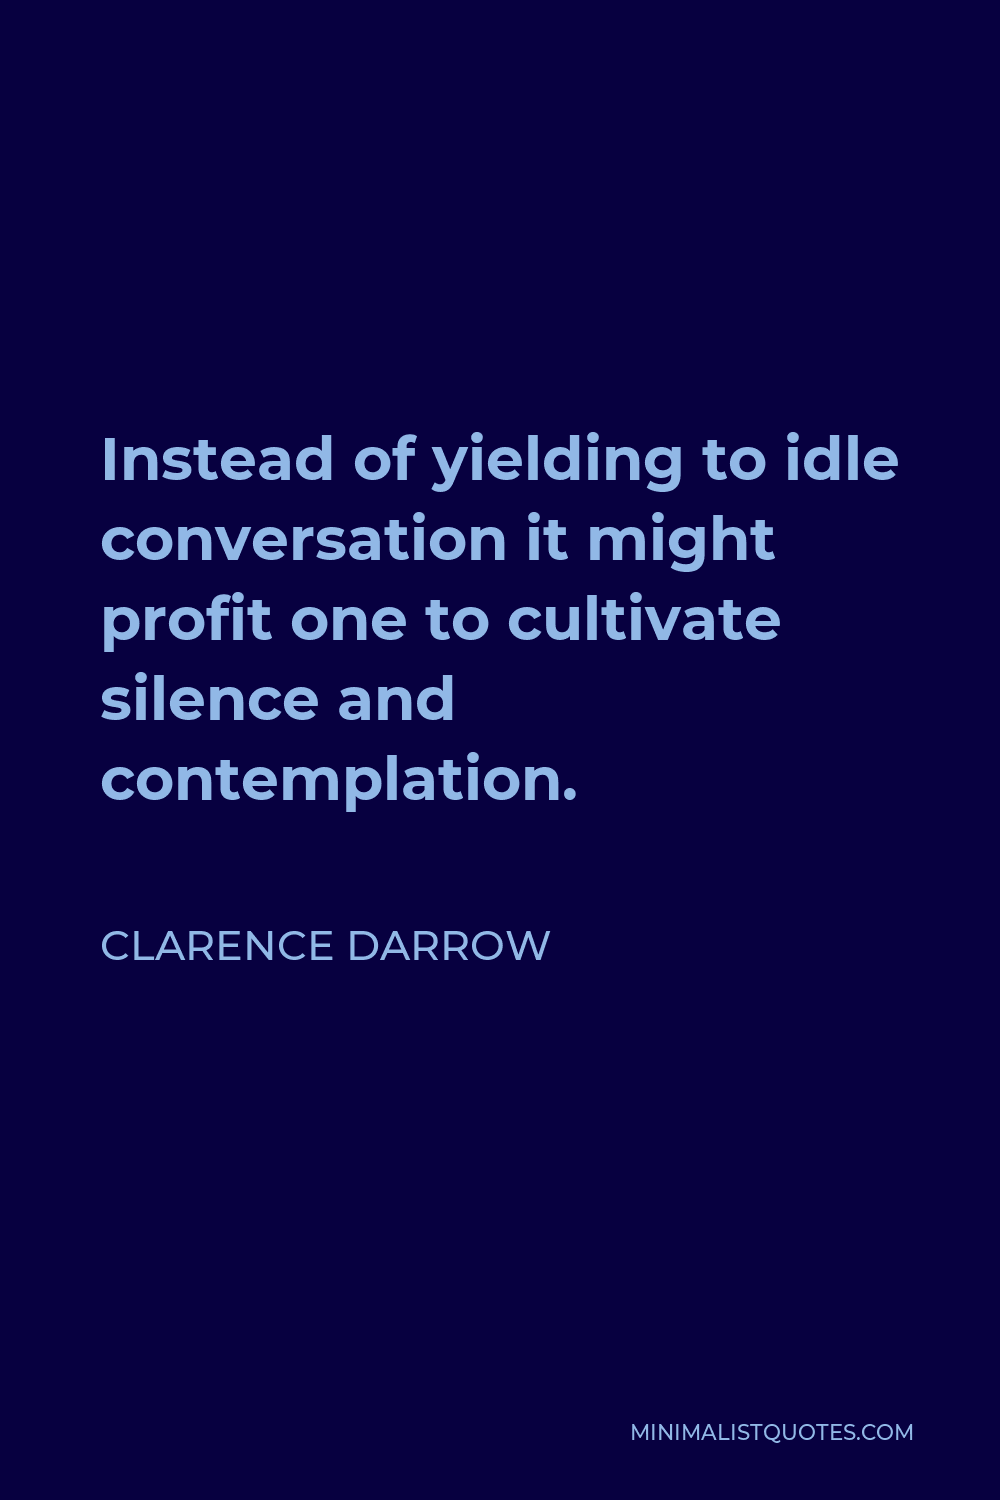 Clarence Darrow Quote - Instead of yielding to idle conversation it might profit one to cultivate silence and contemplation.